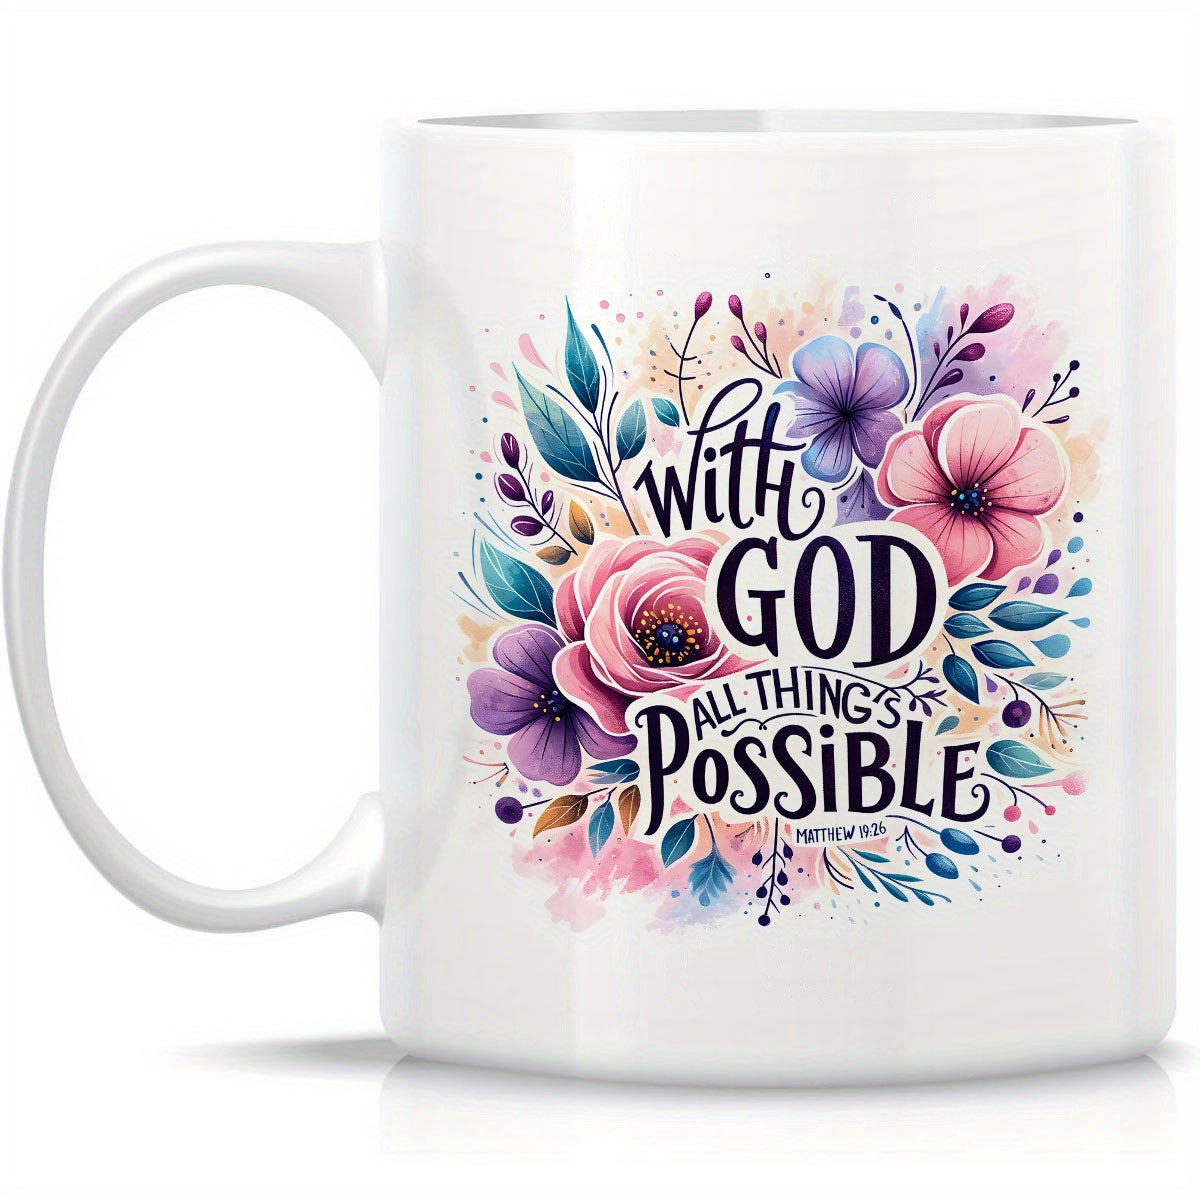 With God All Things Are Possible Christian White Ceramic Mug 11oz Double Side Print claimedbygoddesigns